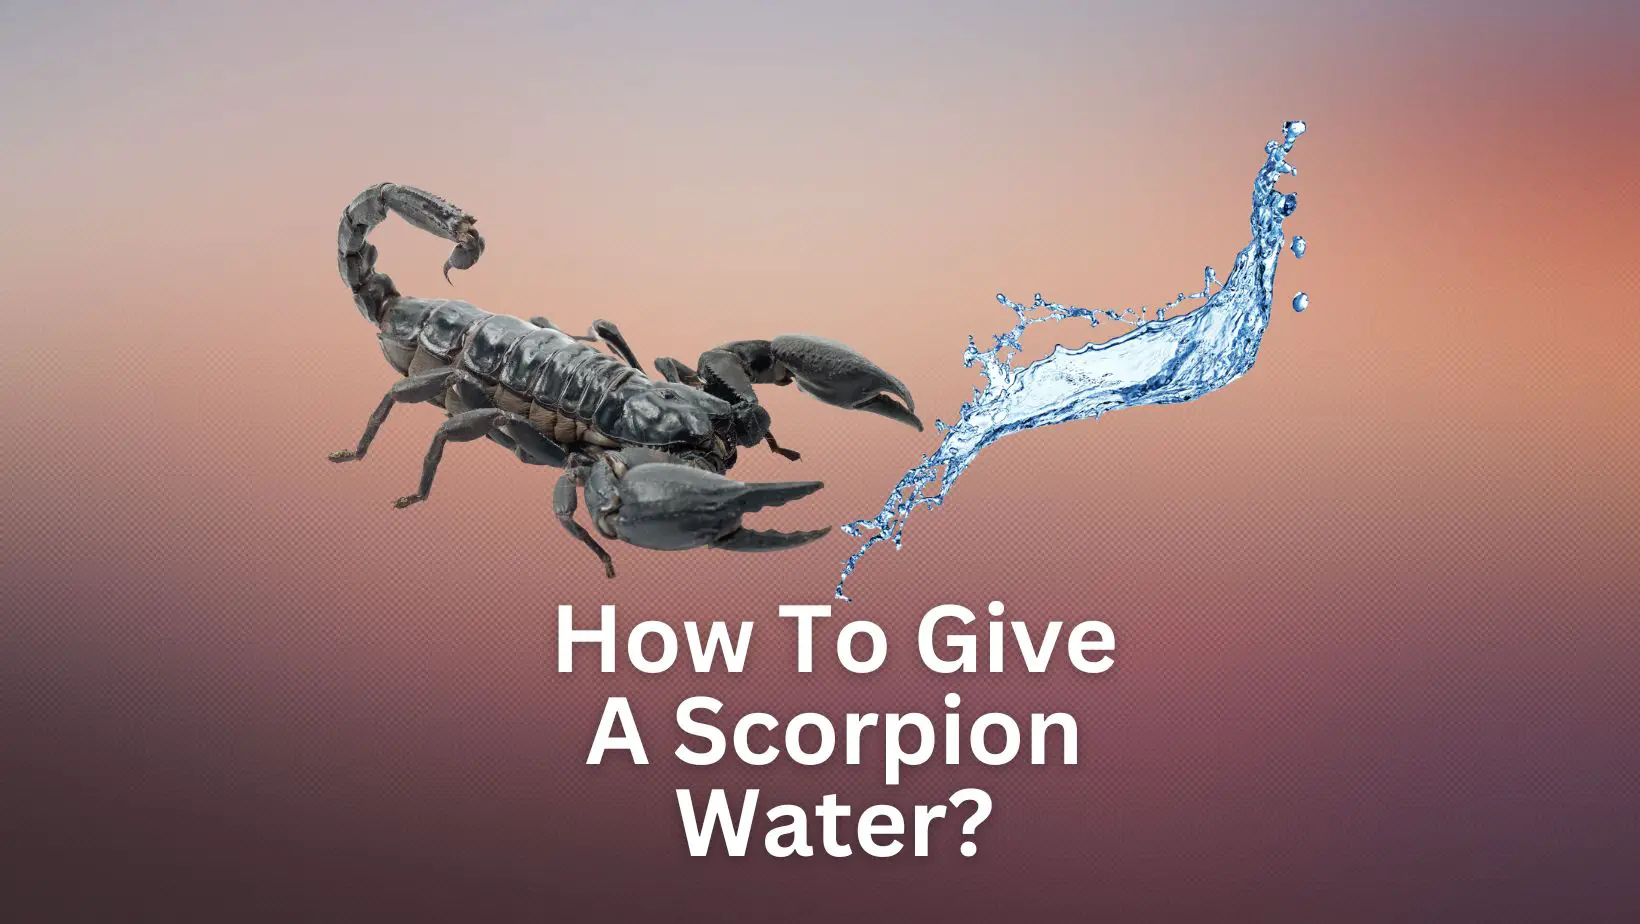 How To Give A Scorpion Water